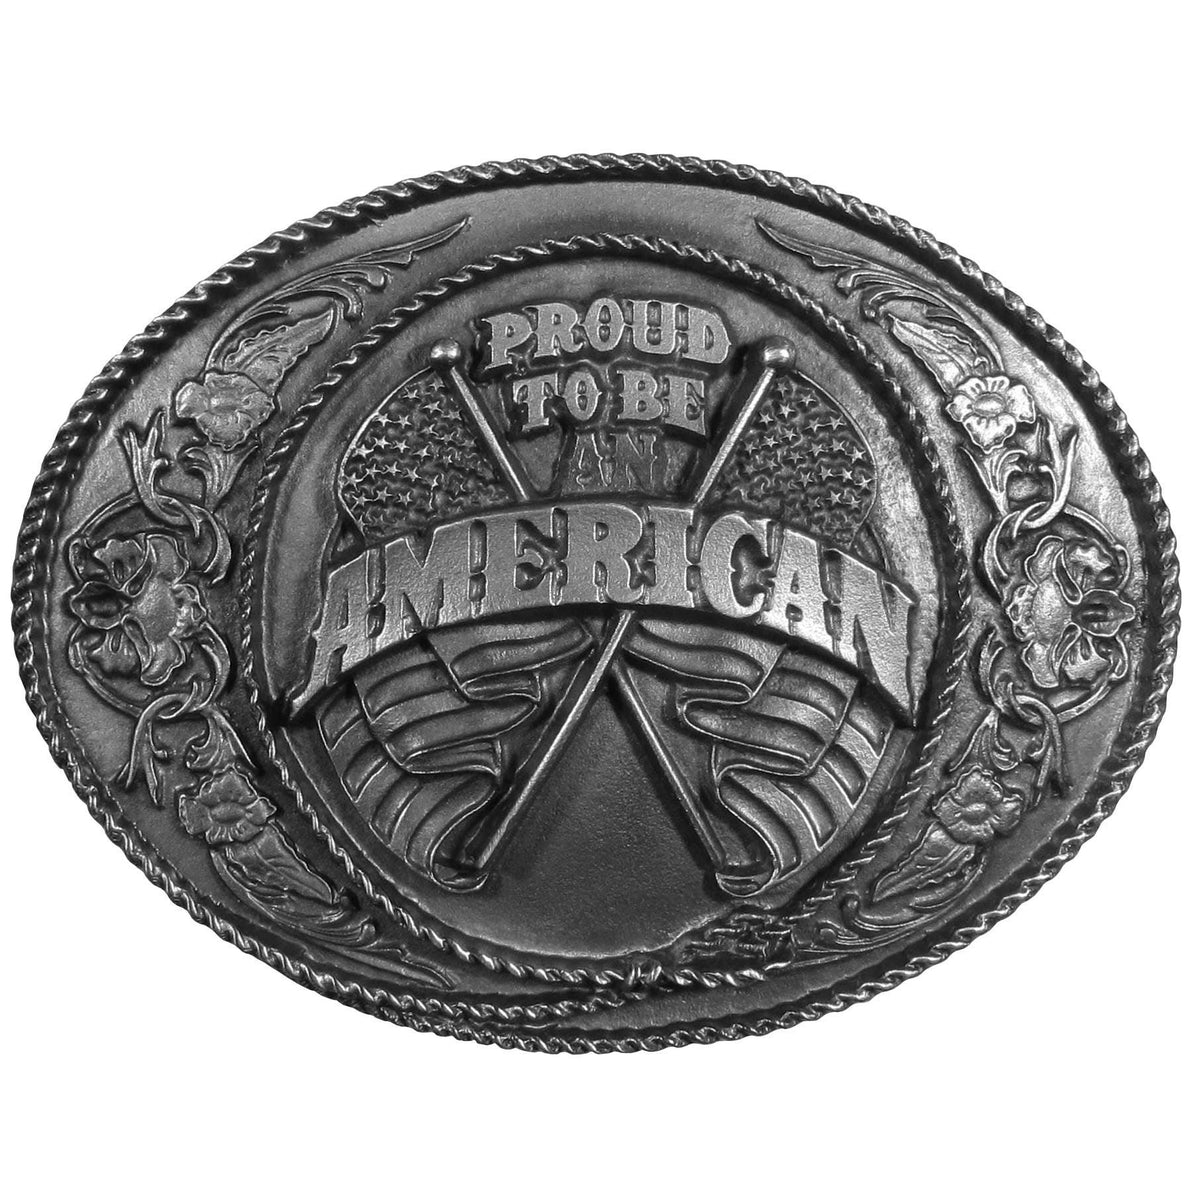 Proud to be an American Antiqued Belt Buckle - Flyclothing LLC